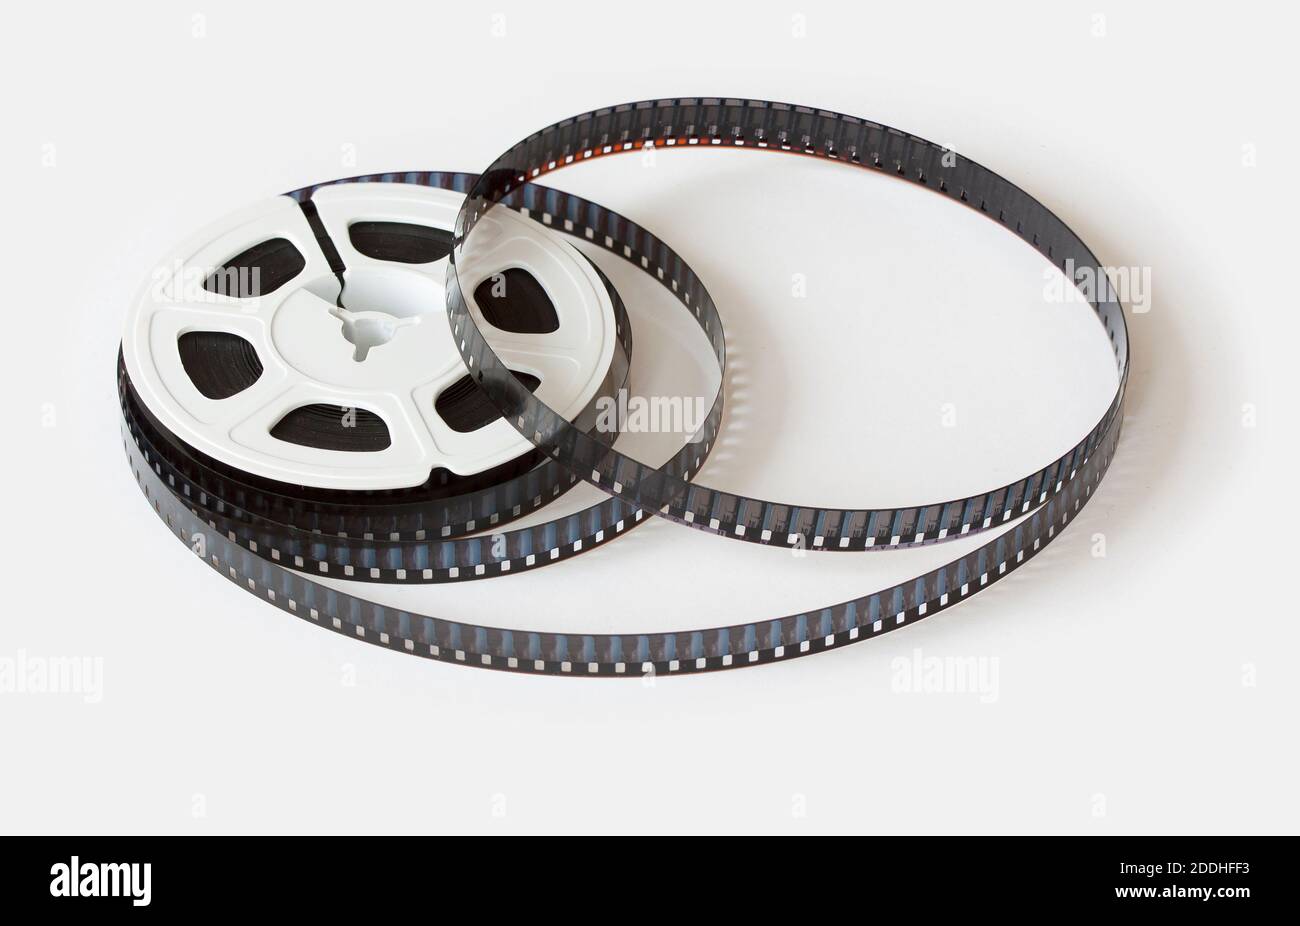 8mm film reel with film strips scattered around. Studio shot, Close-up ...